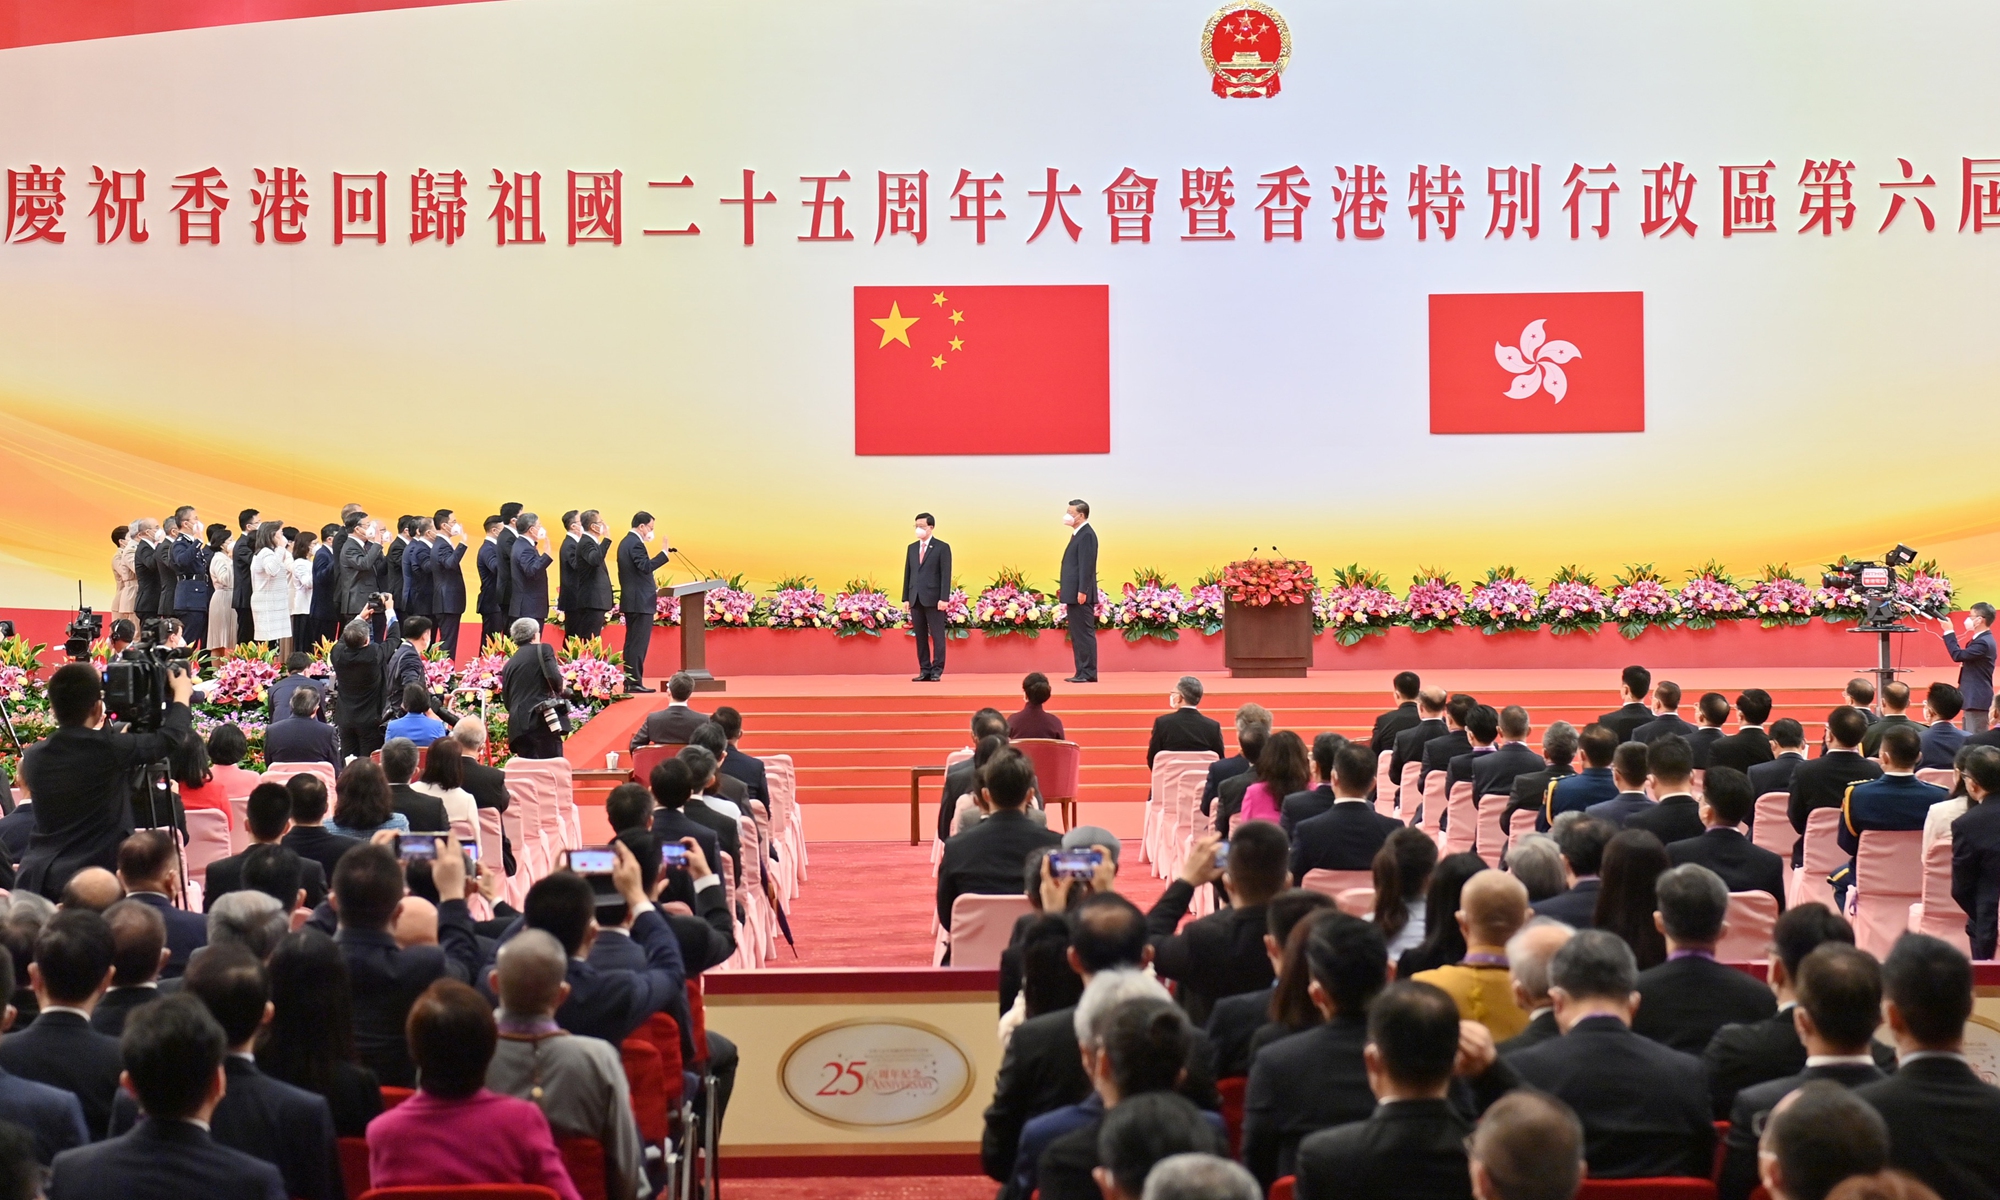 Chinese President Xi Jinping administers oath of office to principal officials of the sixth-term government of the Hong Kong Special Administrative Region (HKSAR) at the Hong Kong Convention and Exhibition Center in Hong Kong, on July 1, 2022. Photo: Xinhua